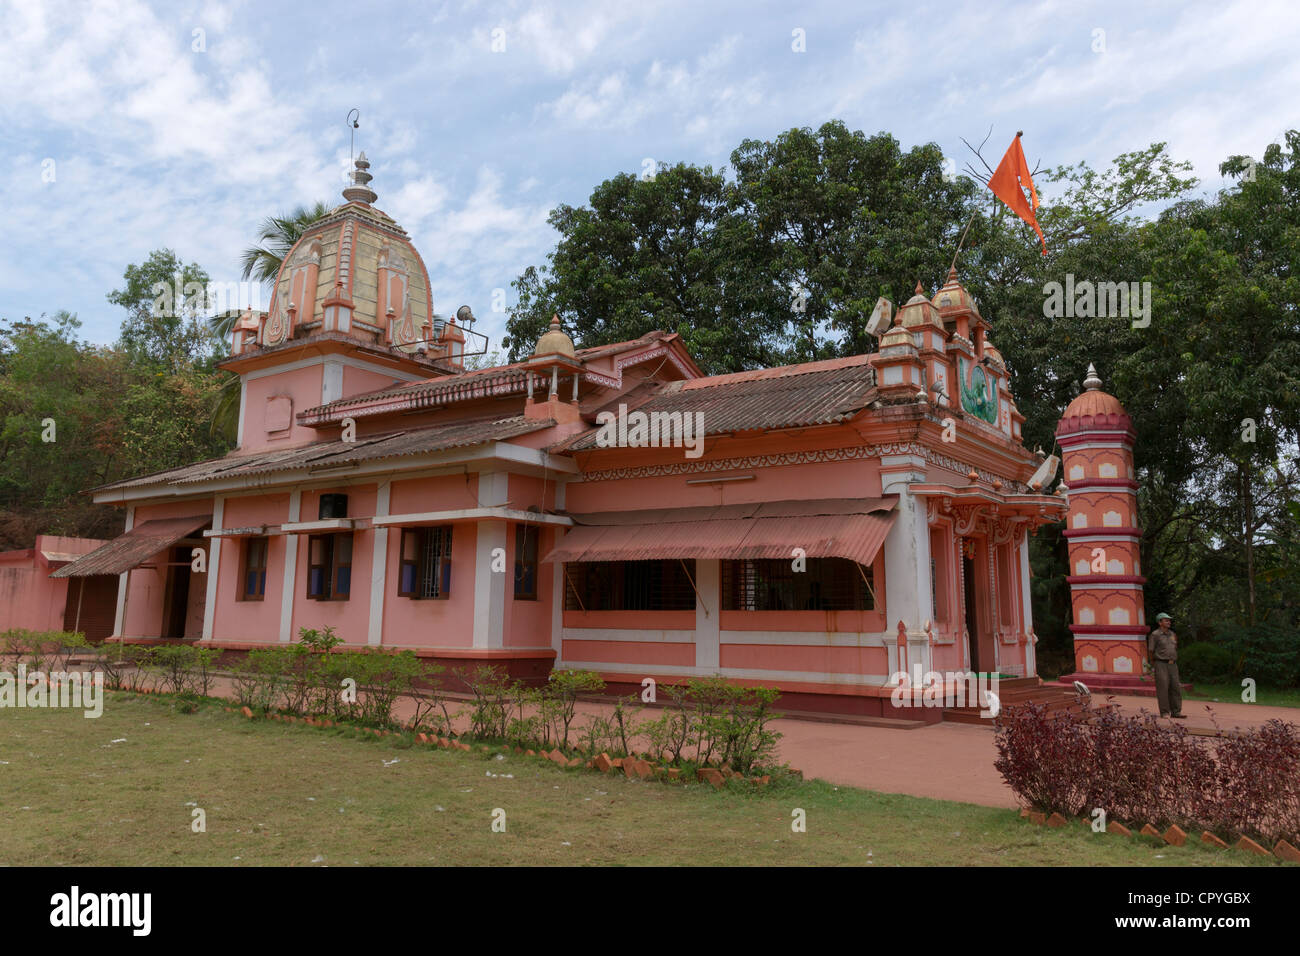 The Shri Gopal Ganapati Temple of Ganesha is situated in Fermagude, Ponda and attracts lots of pilgrims. Stock Photo